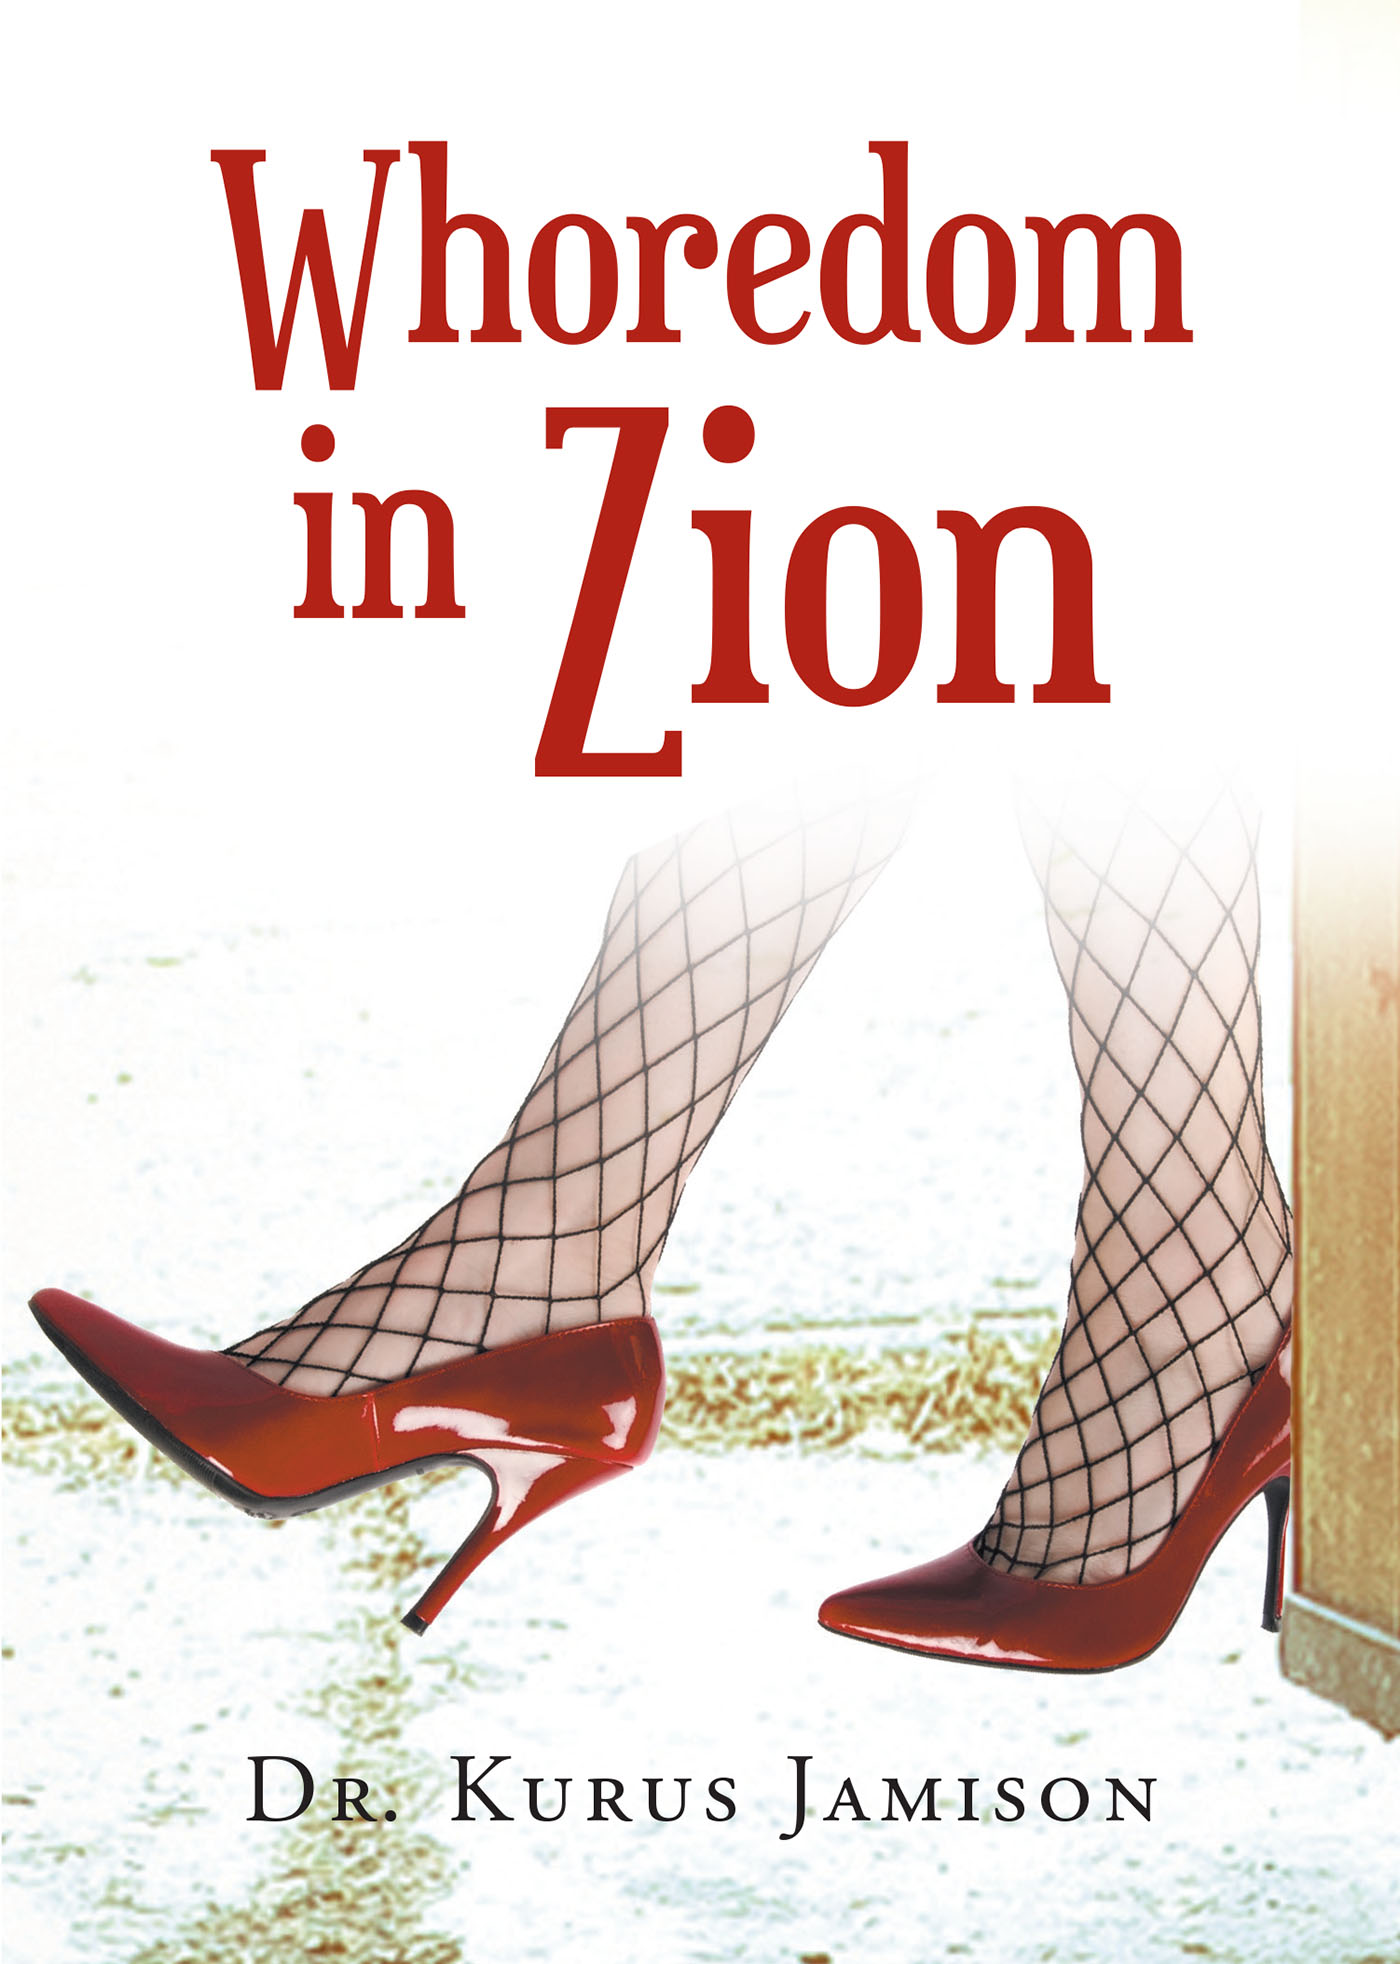 Dr. Kurus Jamison’s Newly Released "Whoredom in Zion" is a Concise Discussion of the Challenges Limiting the Modern Church